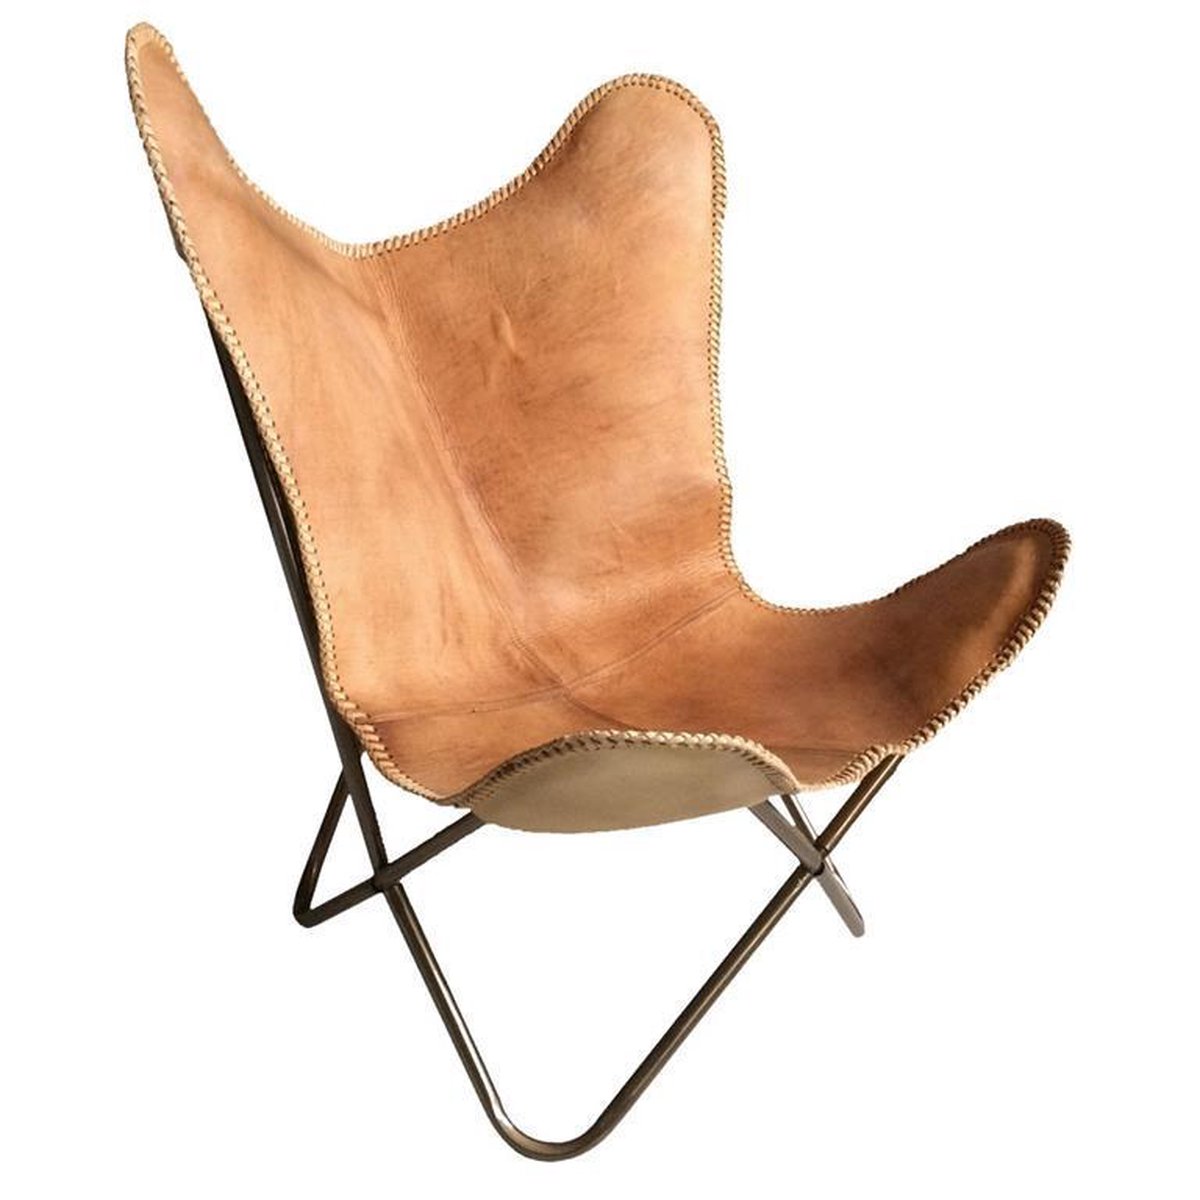 spel Plasticiteit omringen Malagoon - Leather butterfly chair natural brown | bol.com